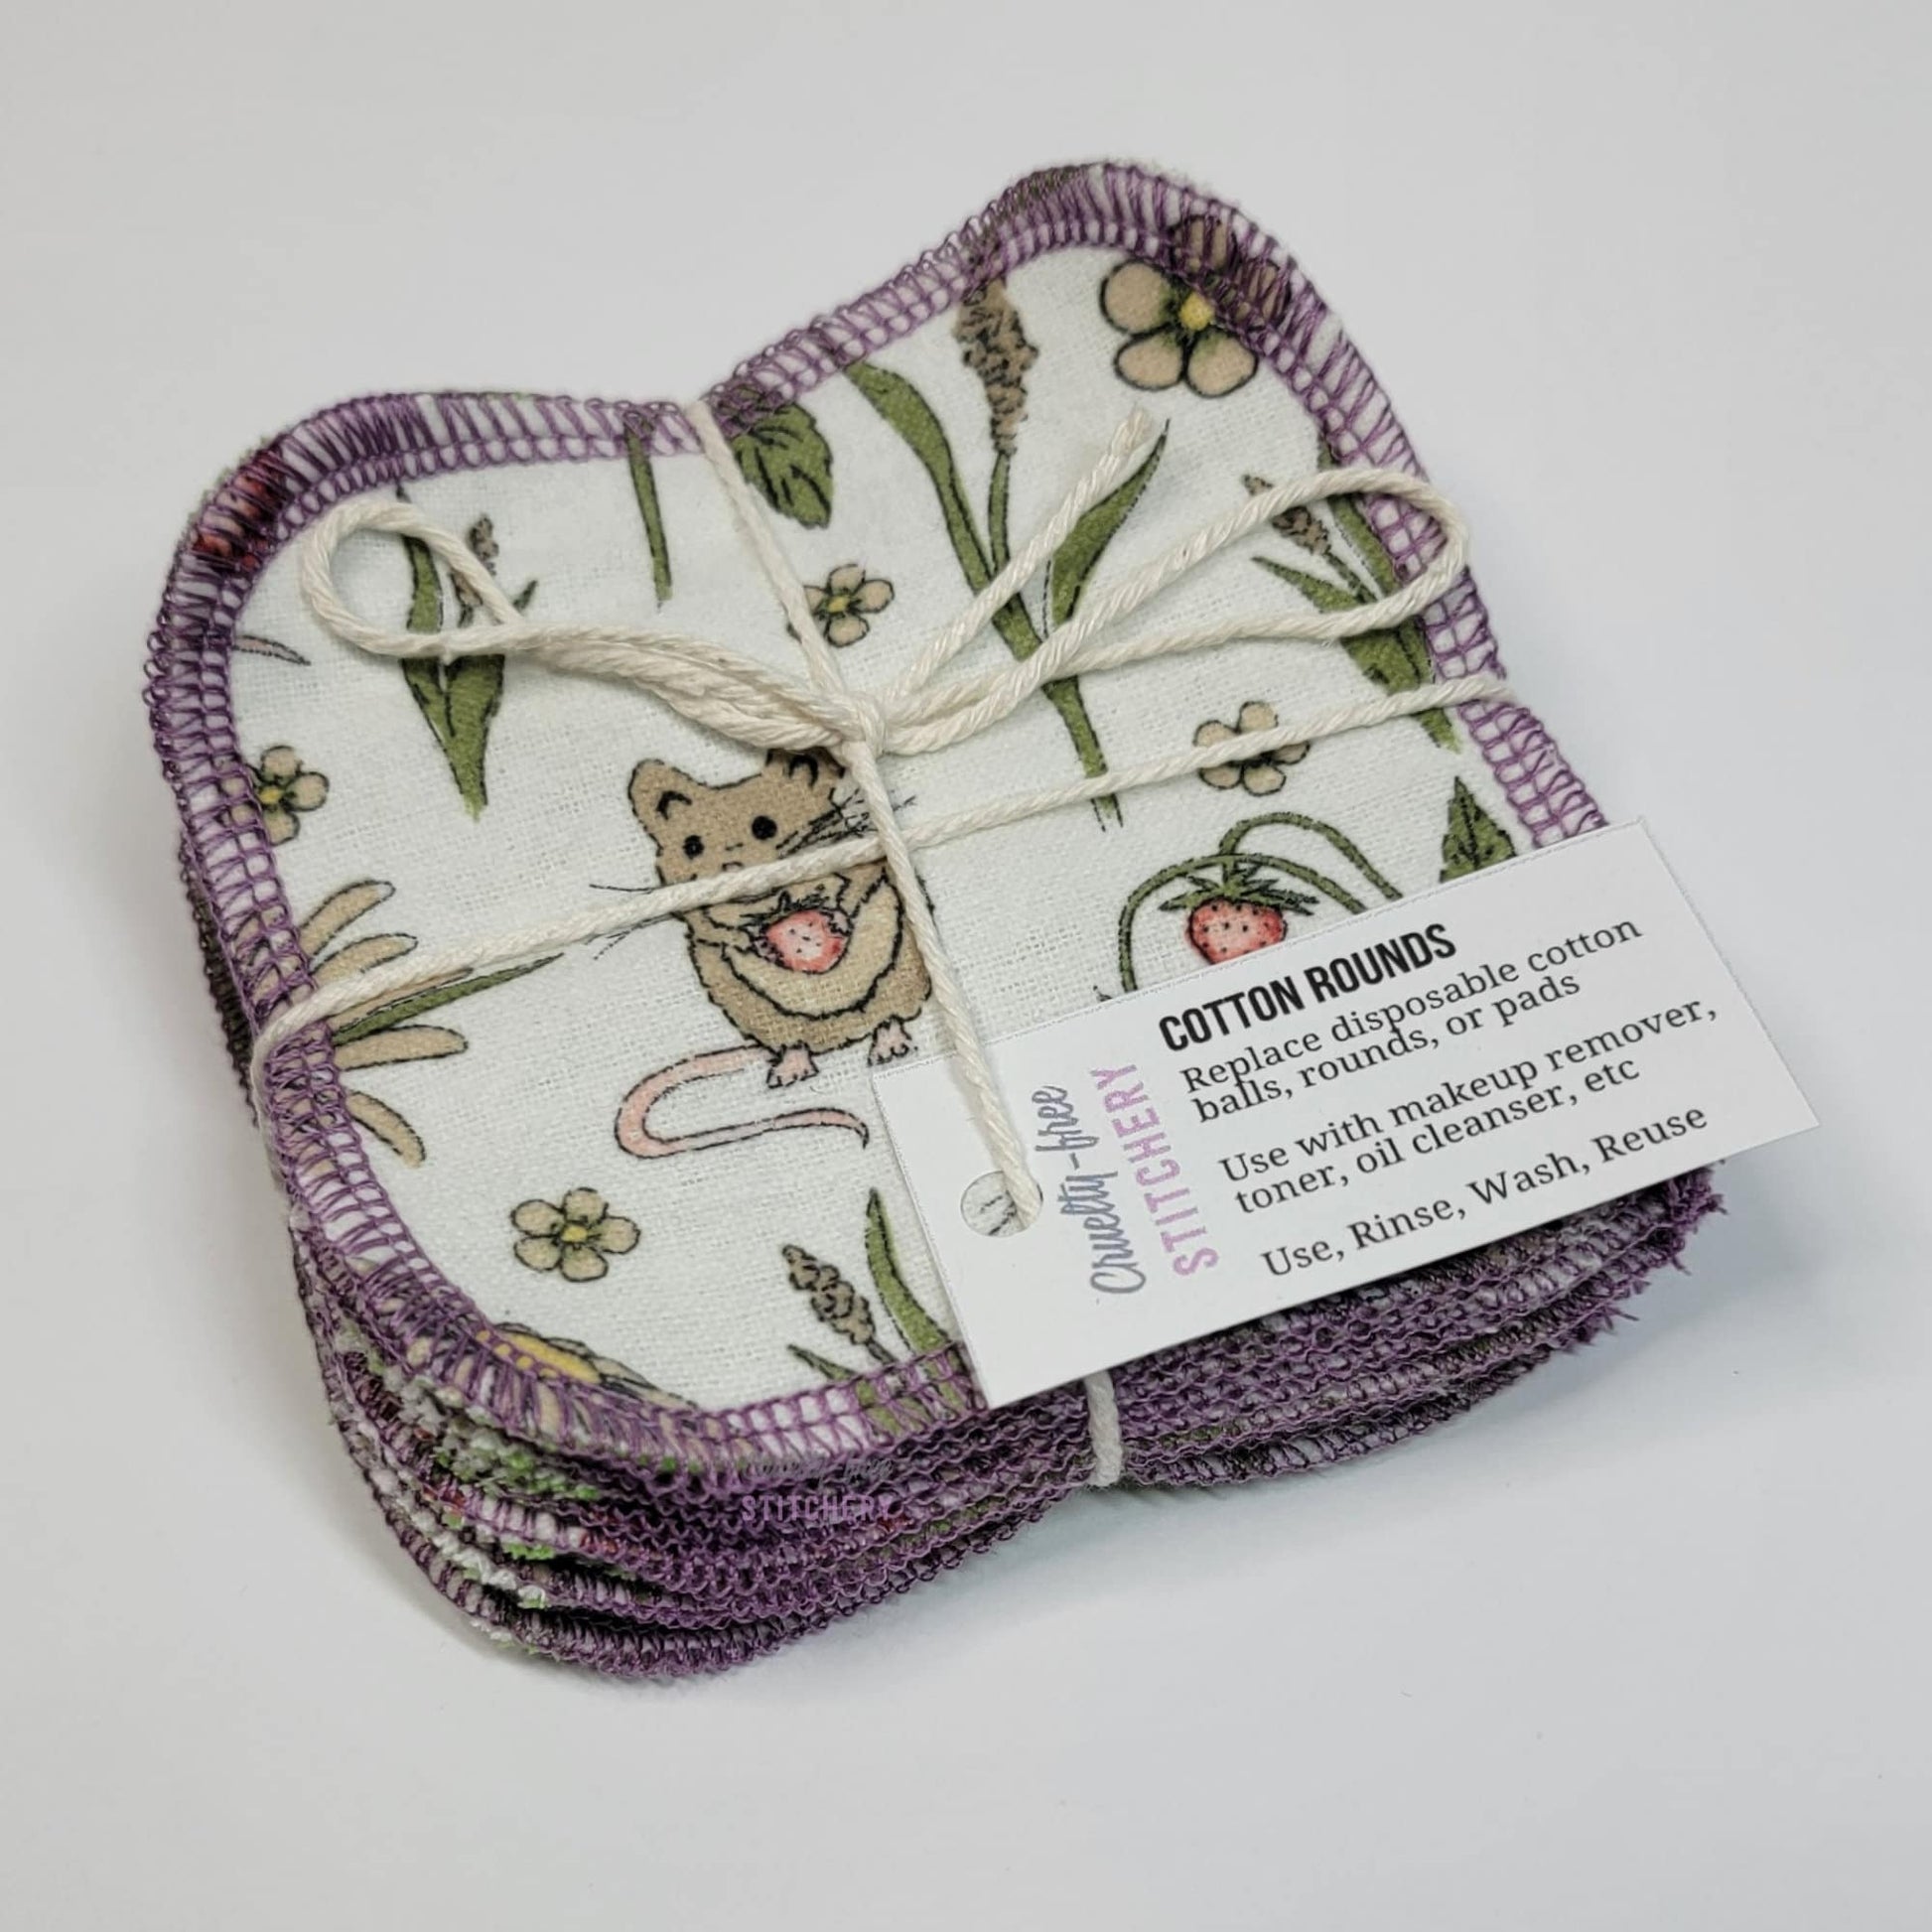 A bundled pack of reusable cotton rounds, tied with an off-white cotton string like a gift with a small white tag.